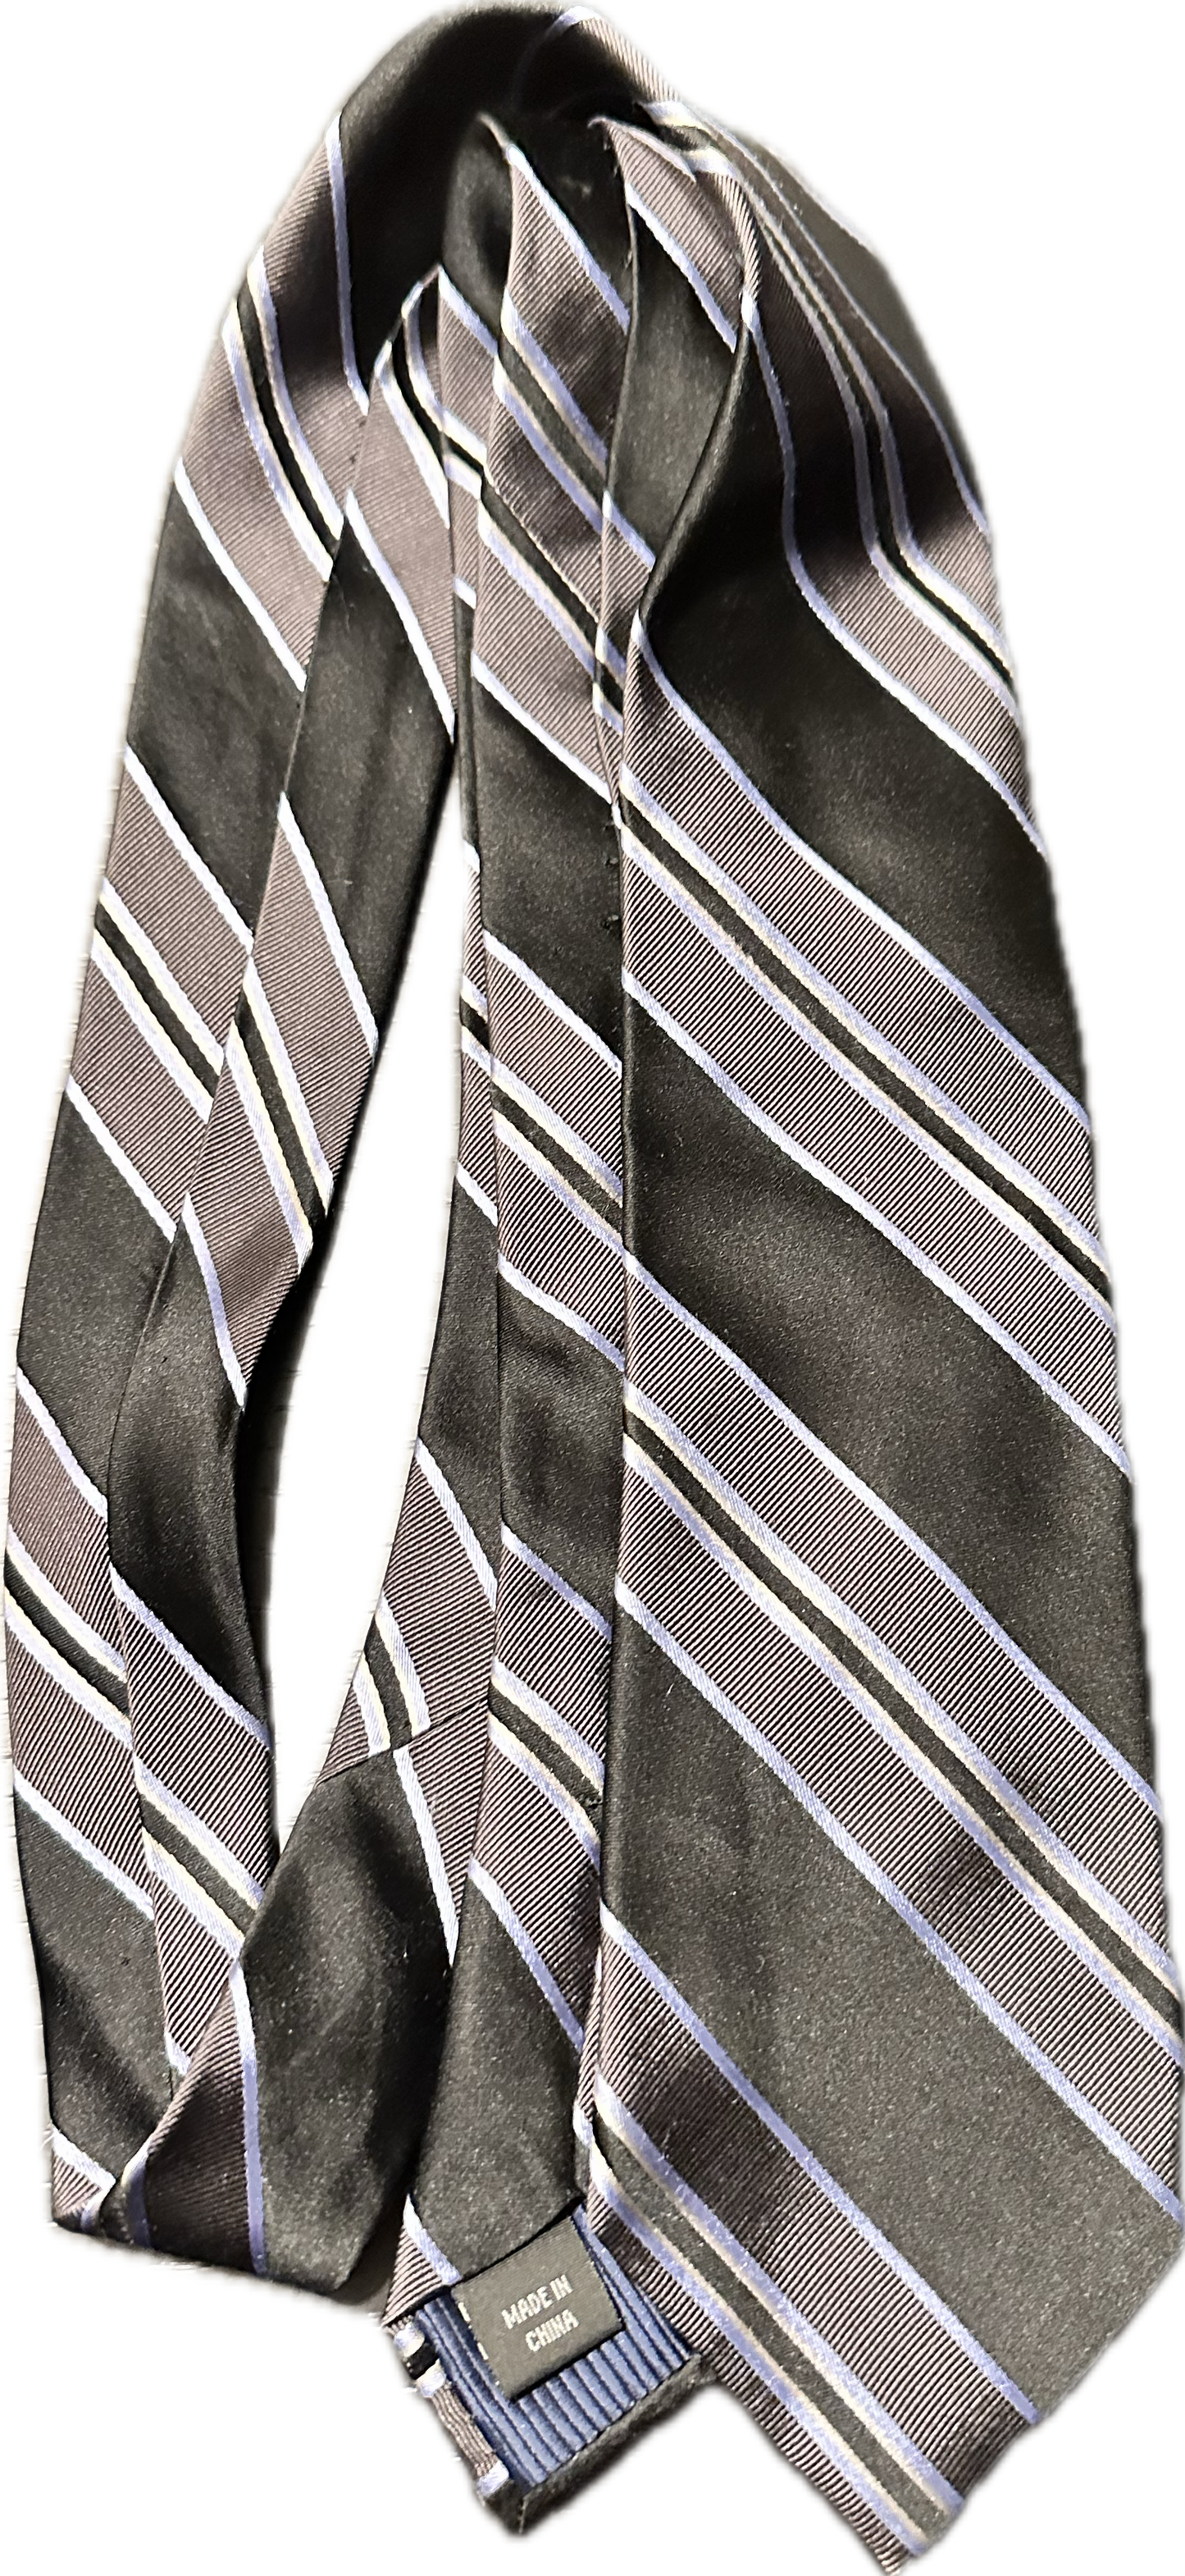 THE OFFICE: Dwight’s Striped Necktie Collection